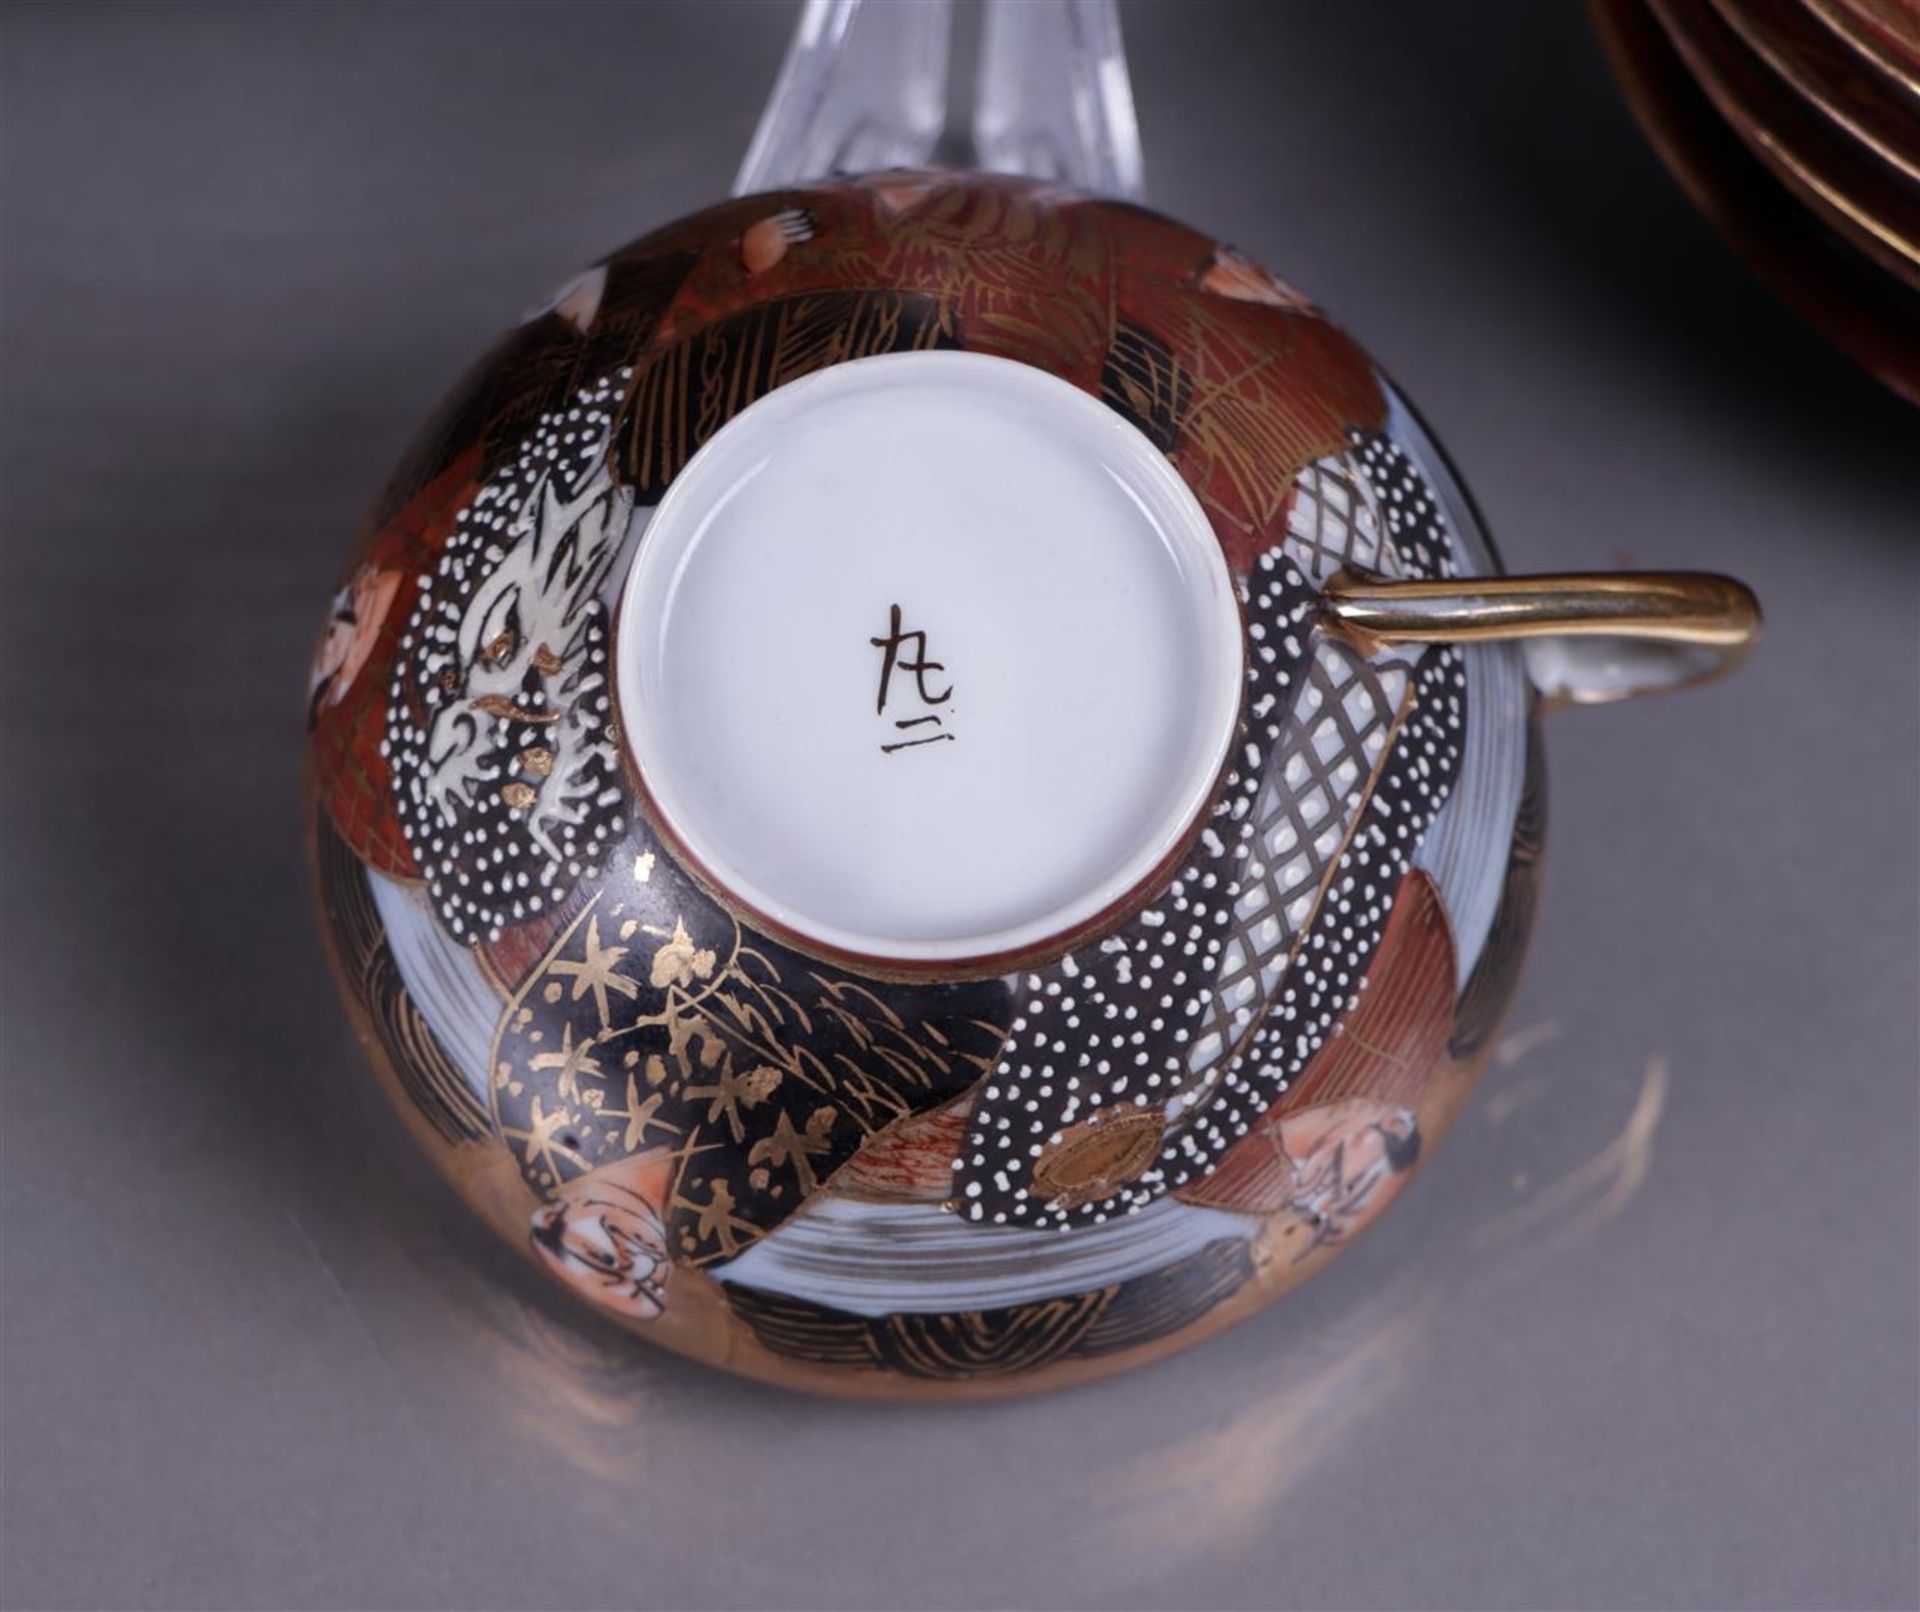 A Satsuma tea set with breakfast plates, plus a tray decorated with various figures. Japan, 19th cen - Image 3 of 5